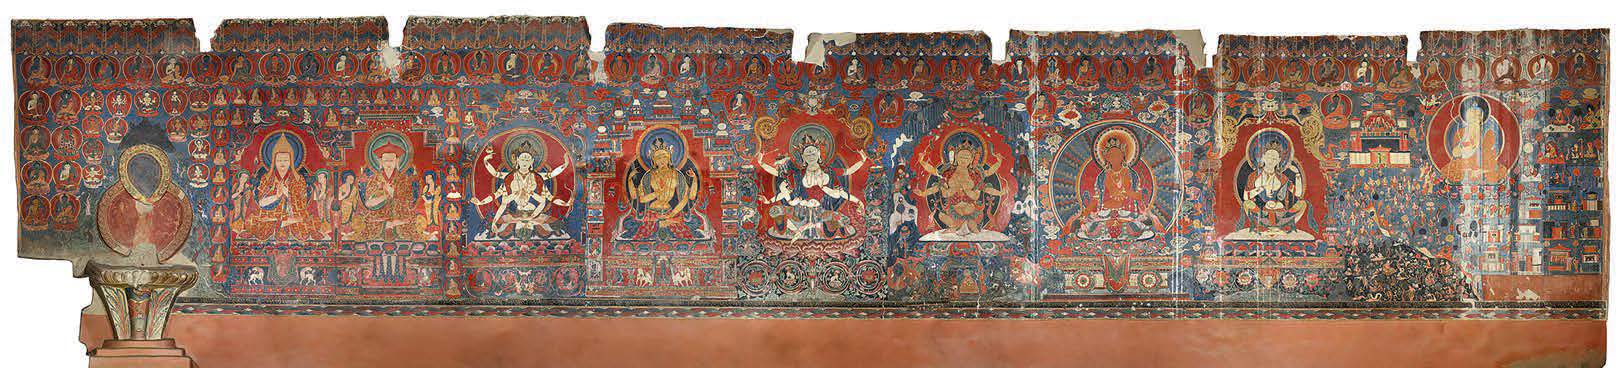 Scanned image of the east wall mural of the White Hall at Tholing Monastery, Ngari Prefecture, Tibet.